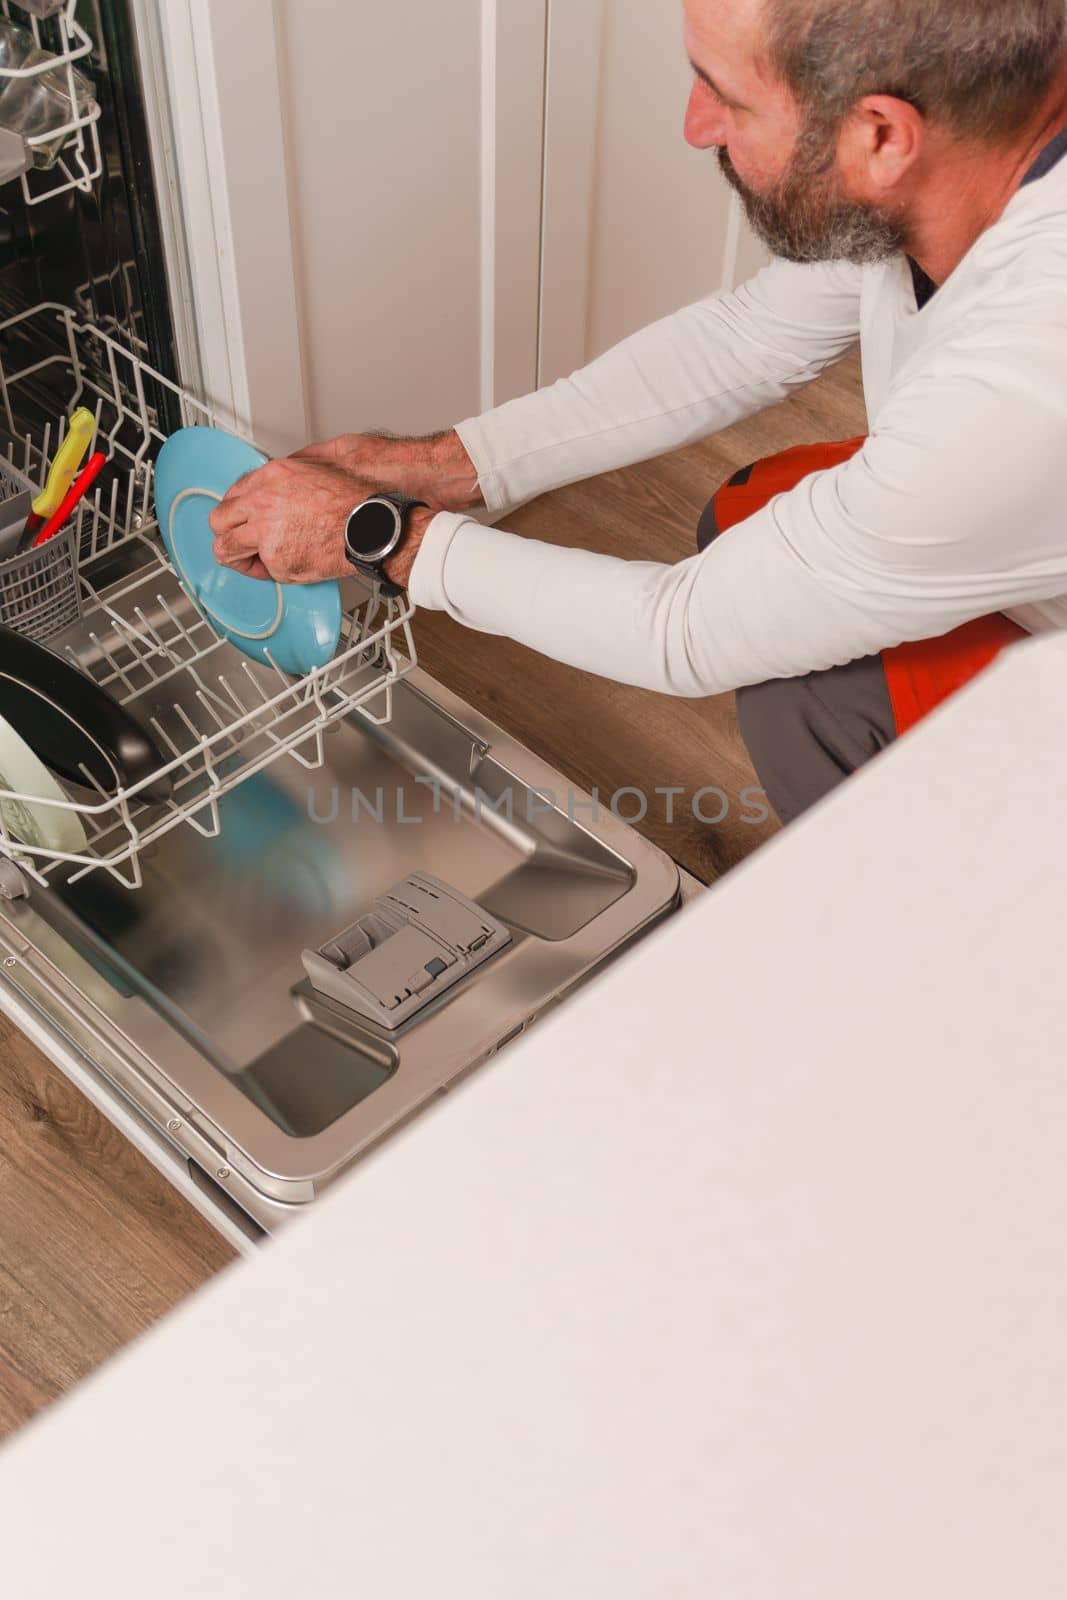 man putting dishes in the dishwasher by joseantona